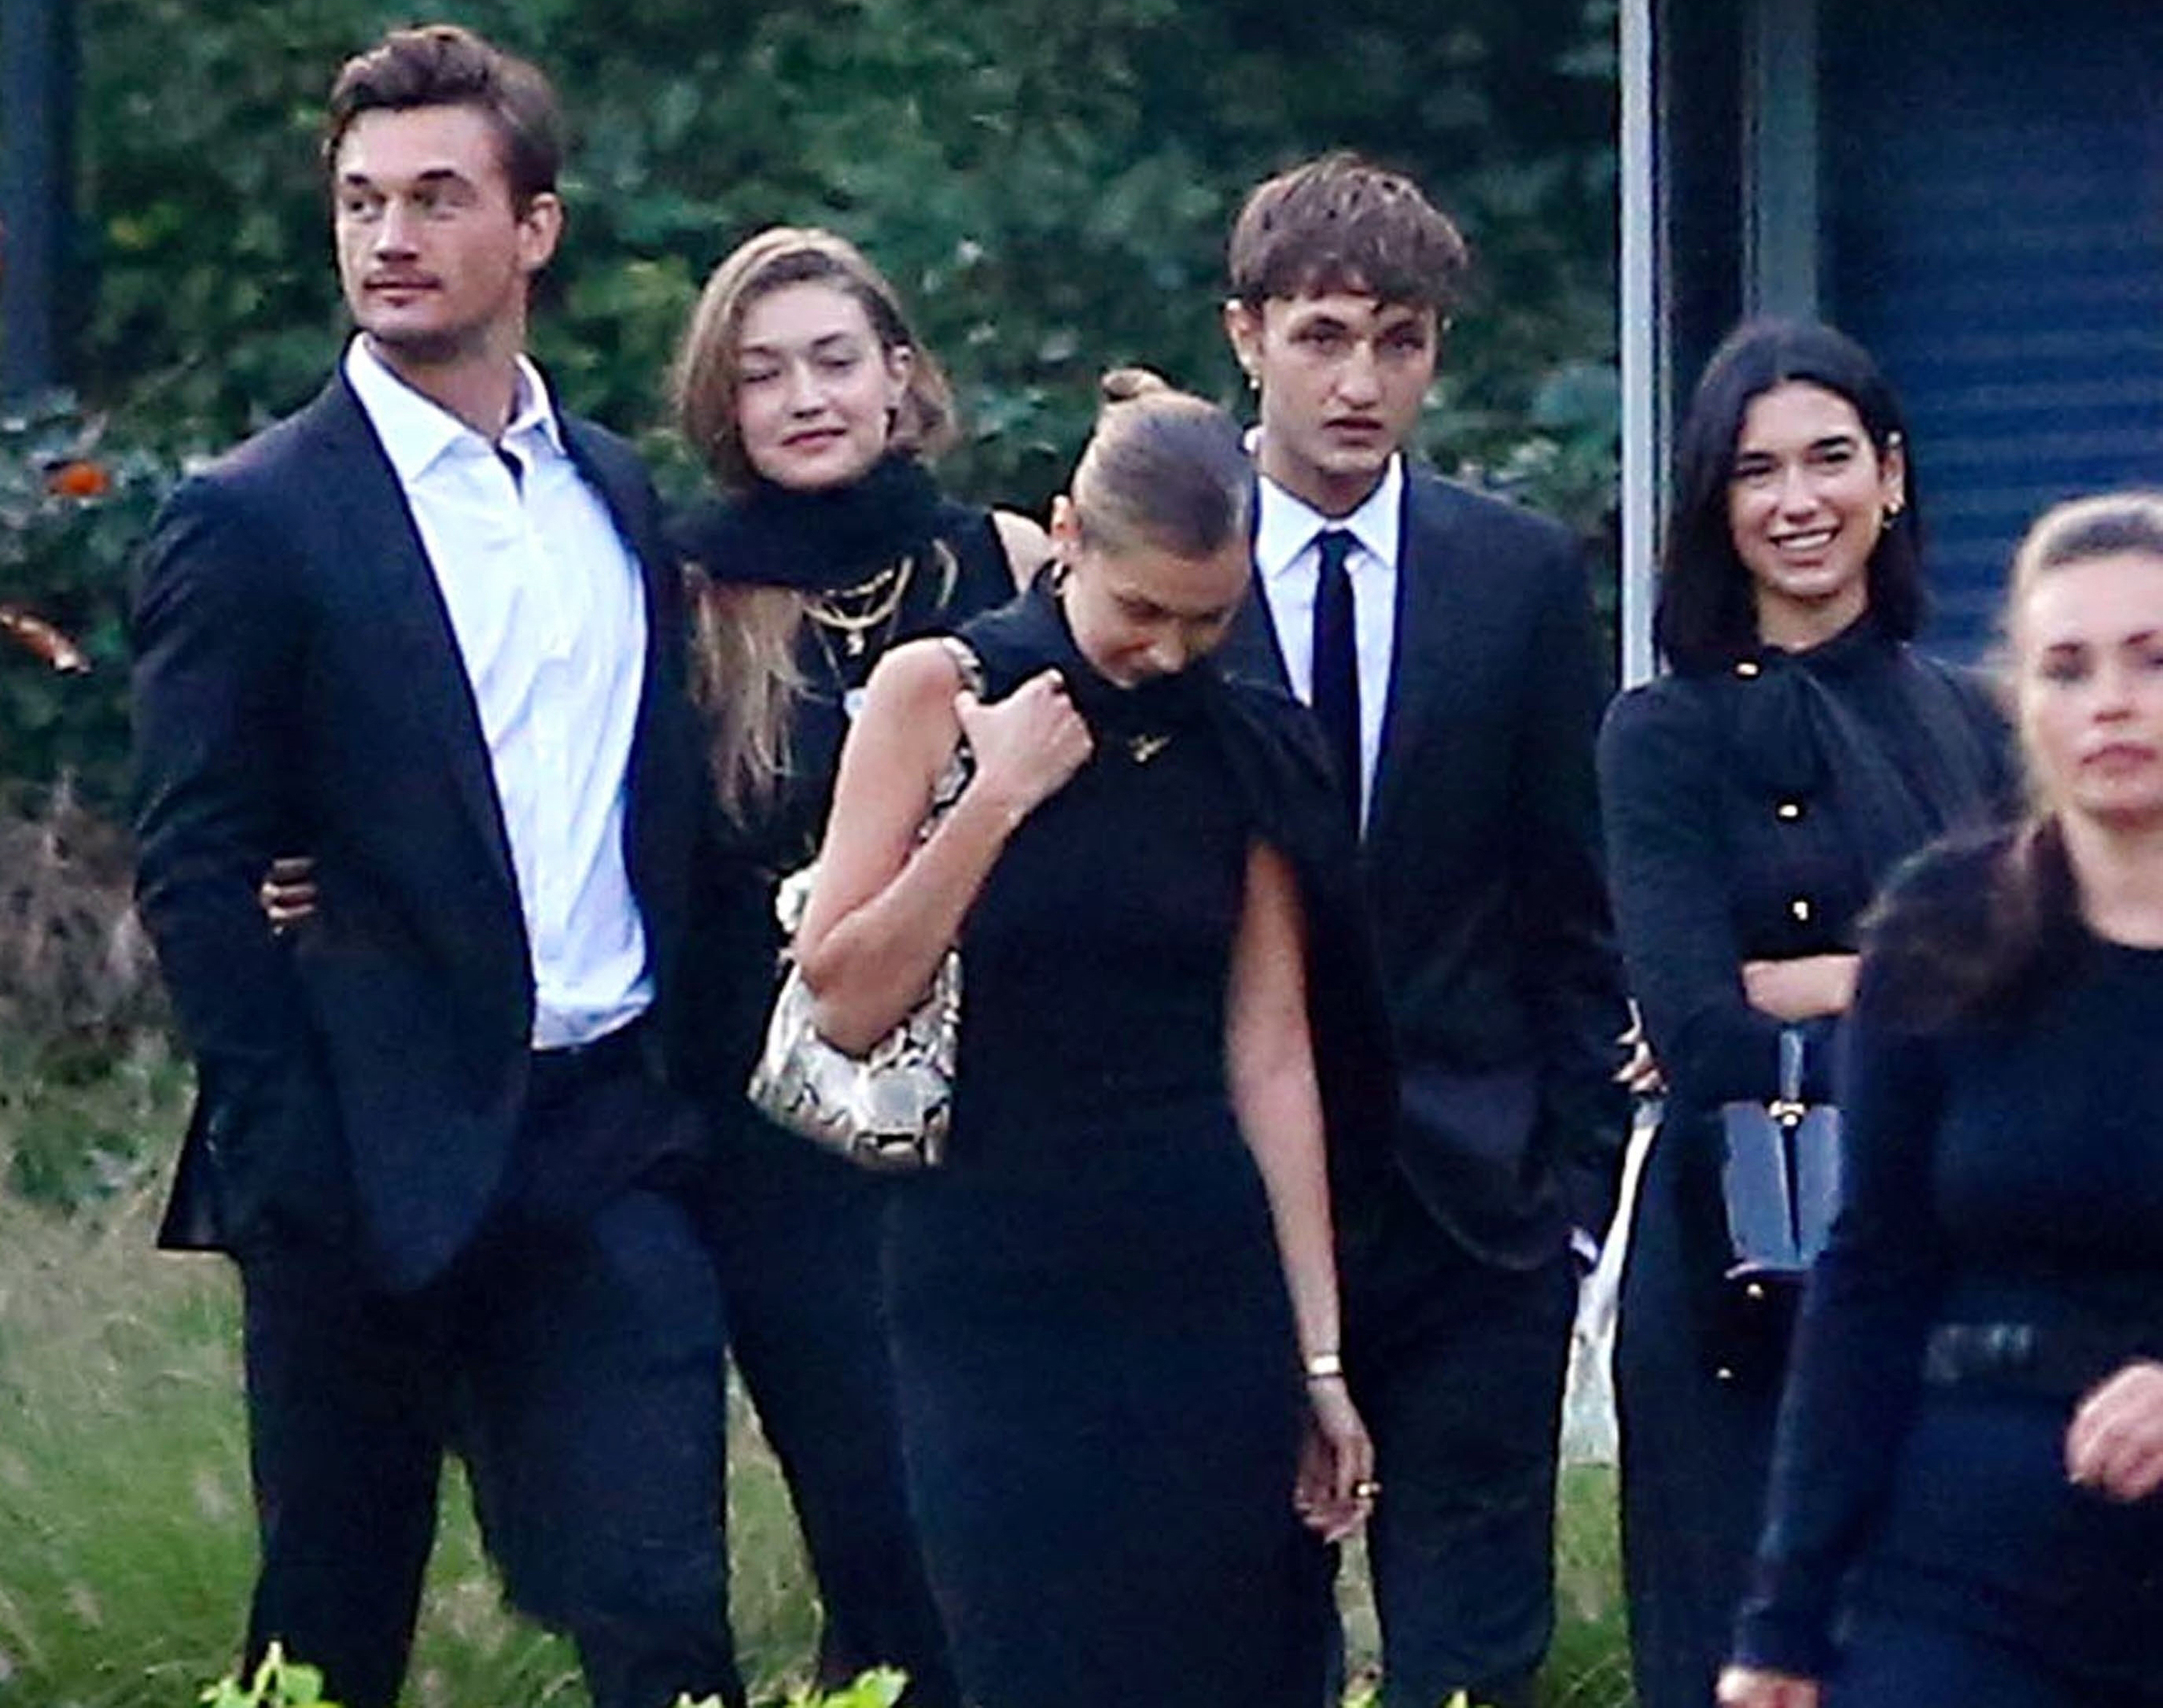 "Not so serious Love!": Gigi Hadid and Tyler Cameron seem to be in secret relationship. 6